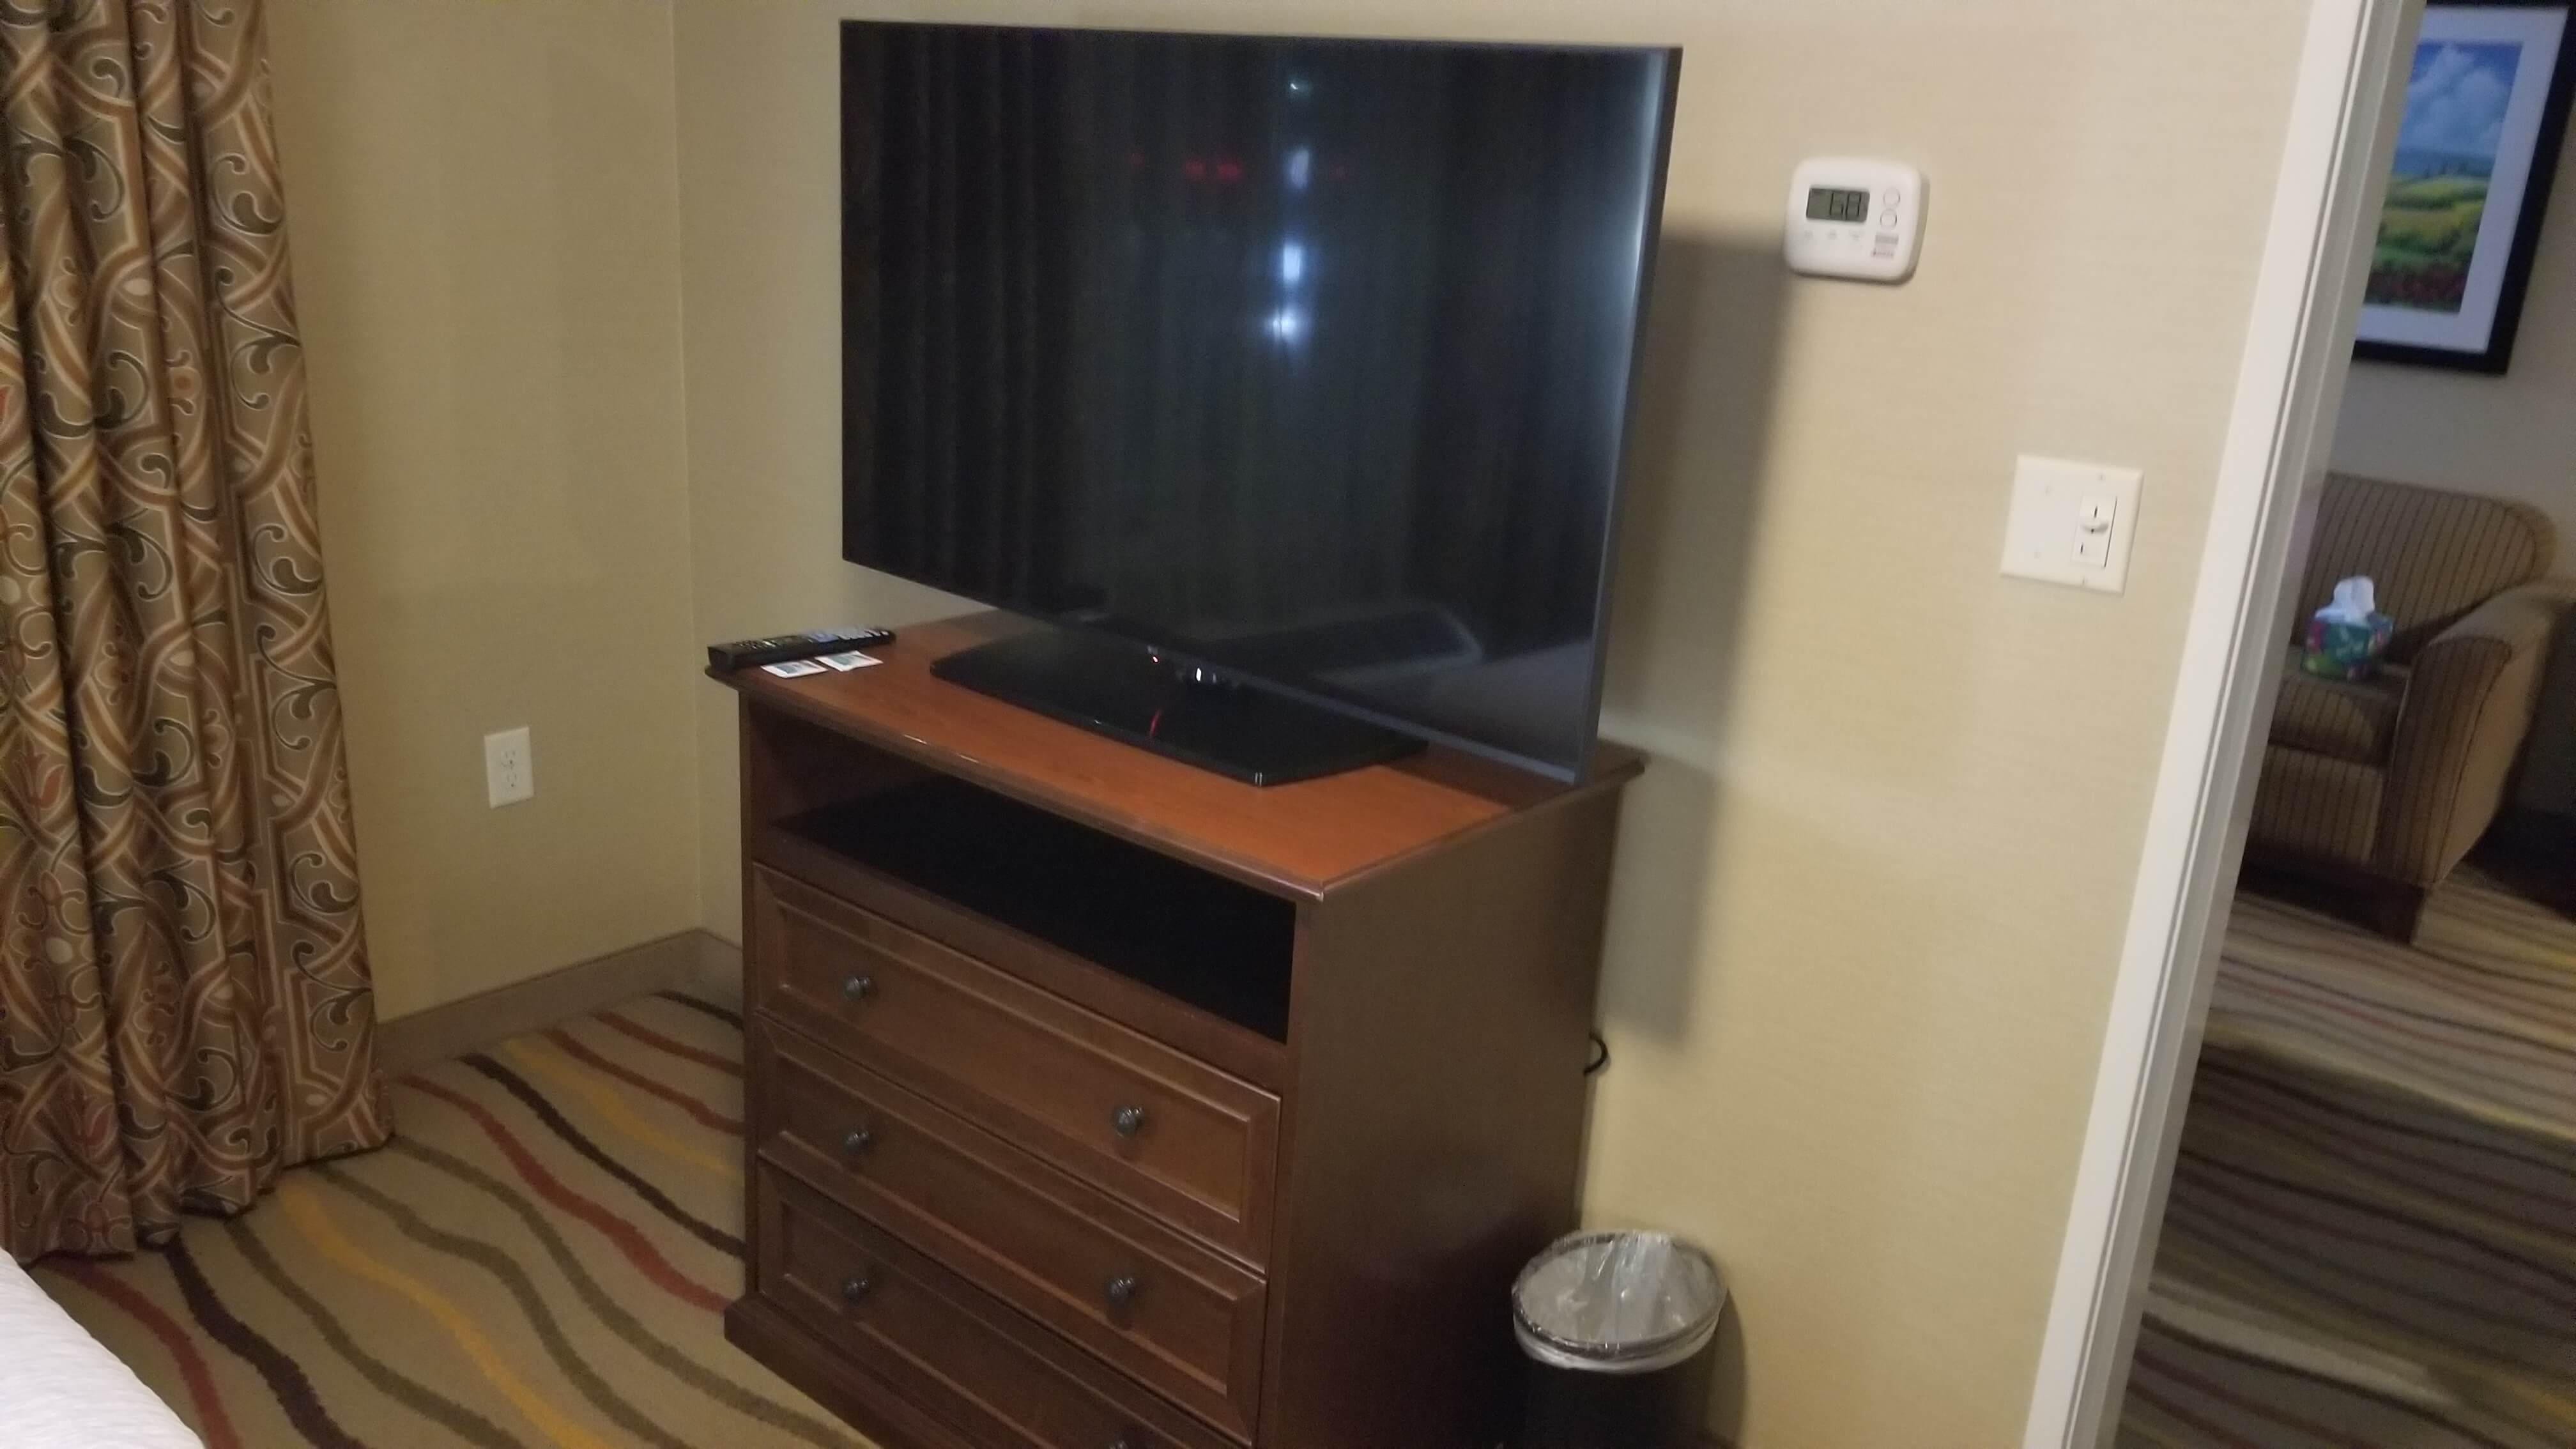 Picture of bedroom TV and dresser.